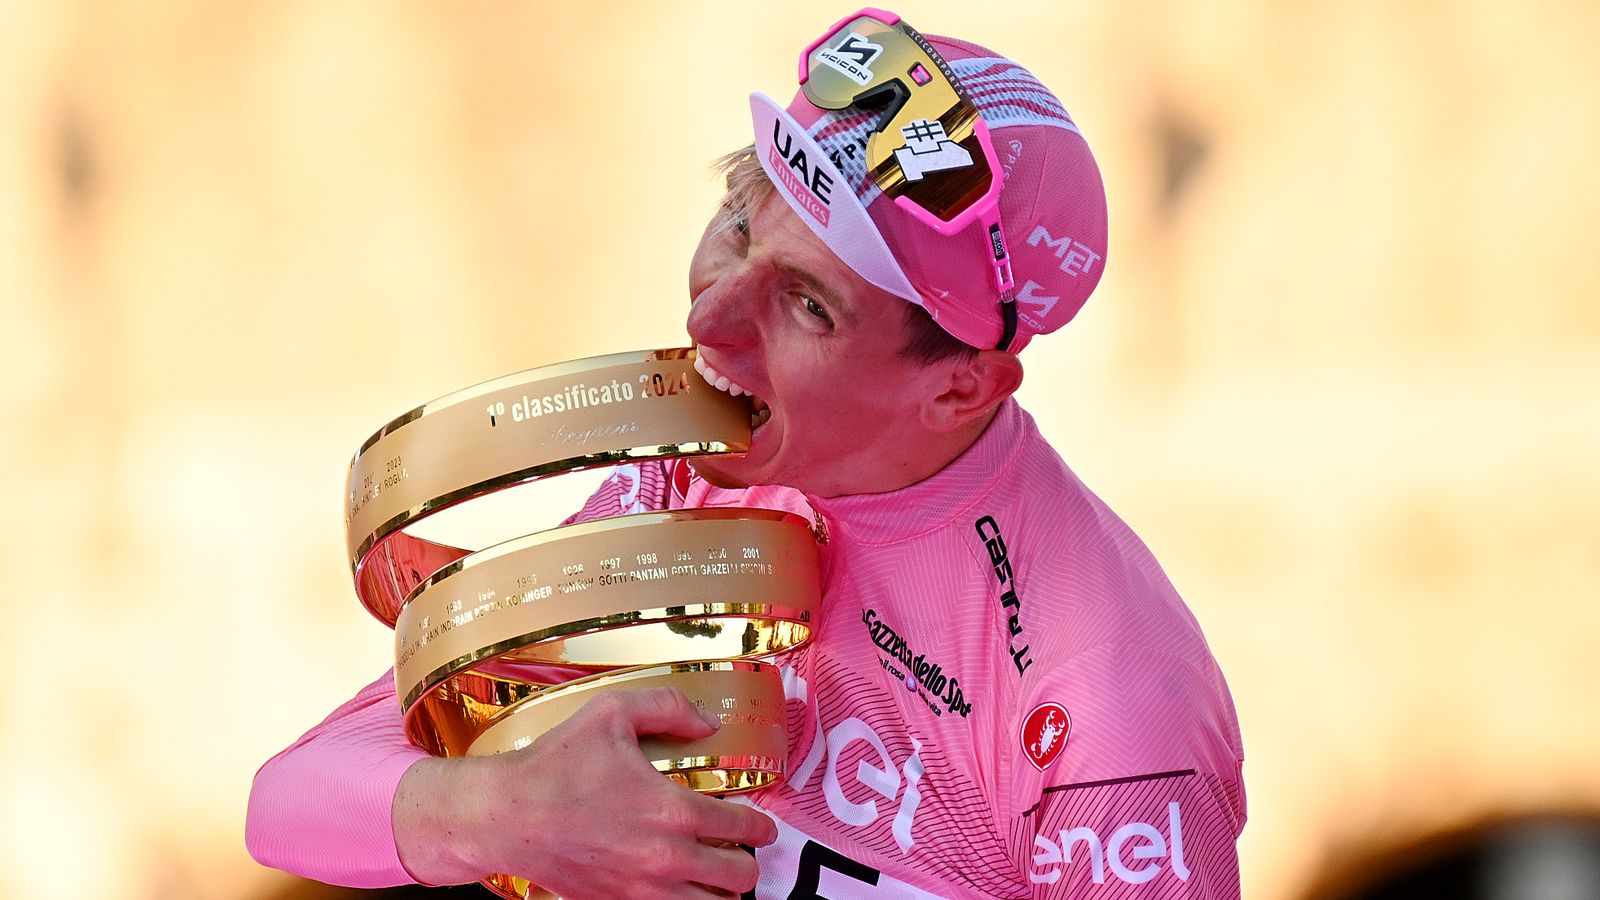 Giro d’Italia: Great Britain’s Geraint Thomas finishes third as Tadej Pogacar wins event by almost 10 minutes